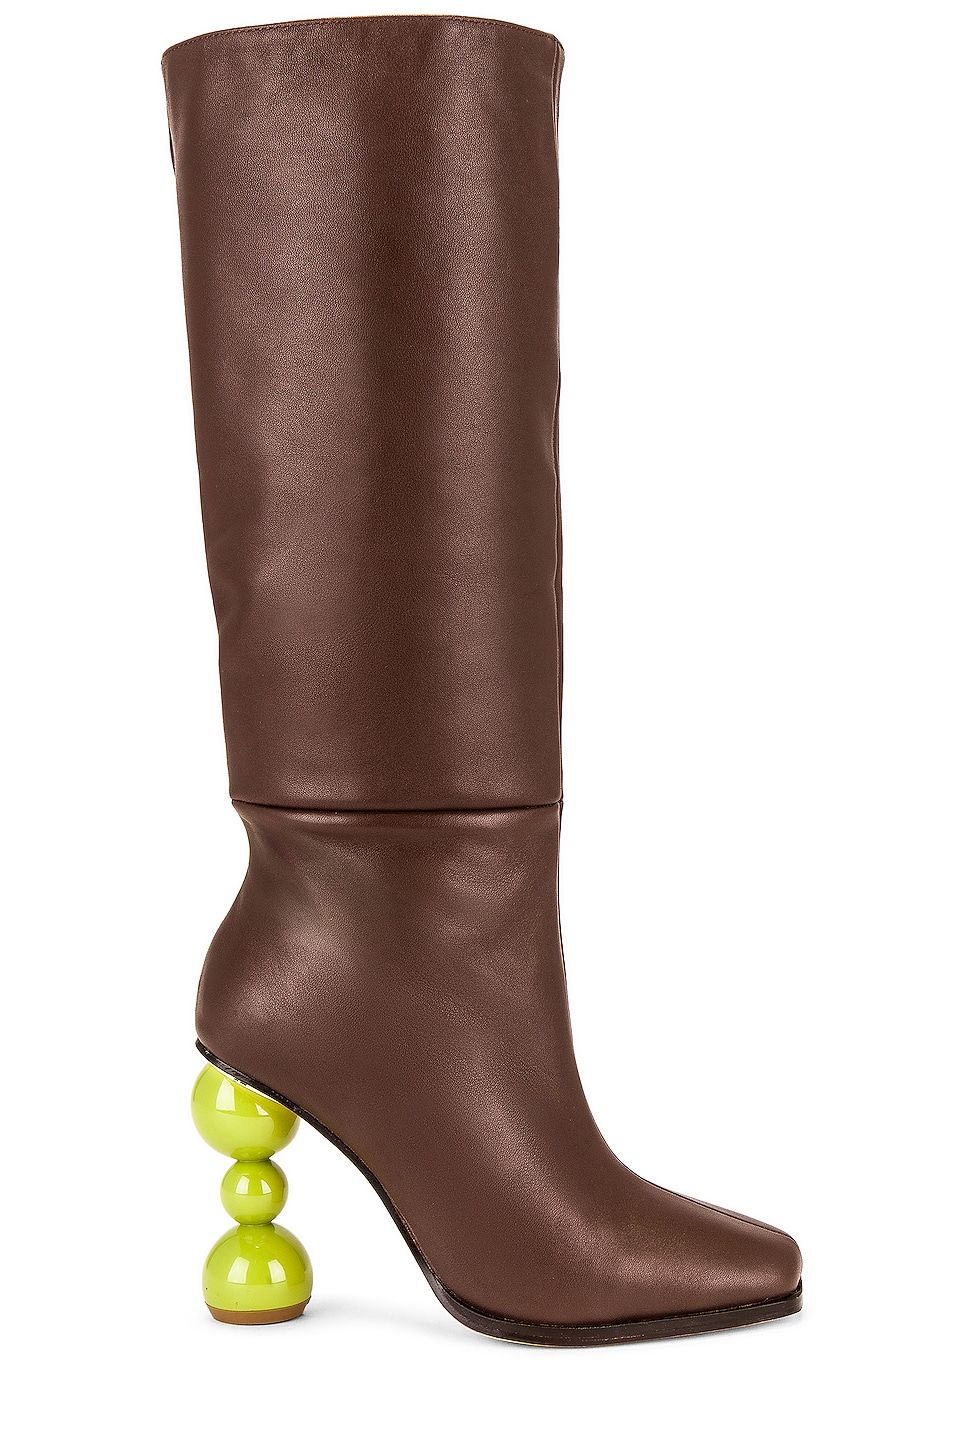 Song of Style Matcha Boot